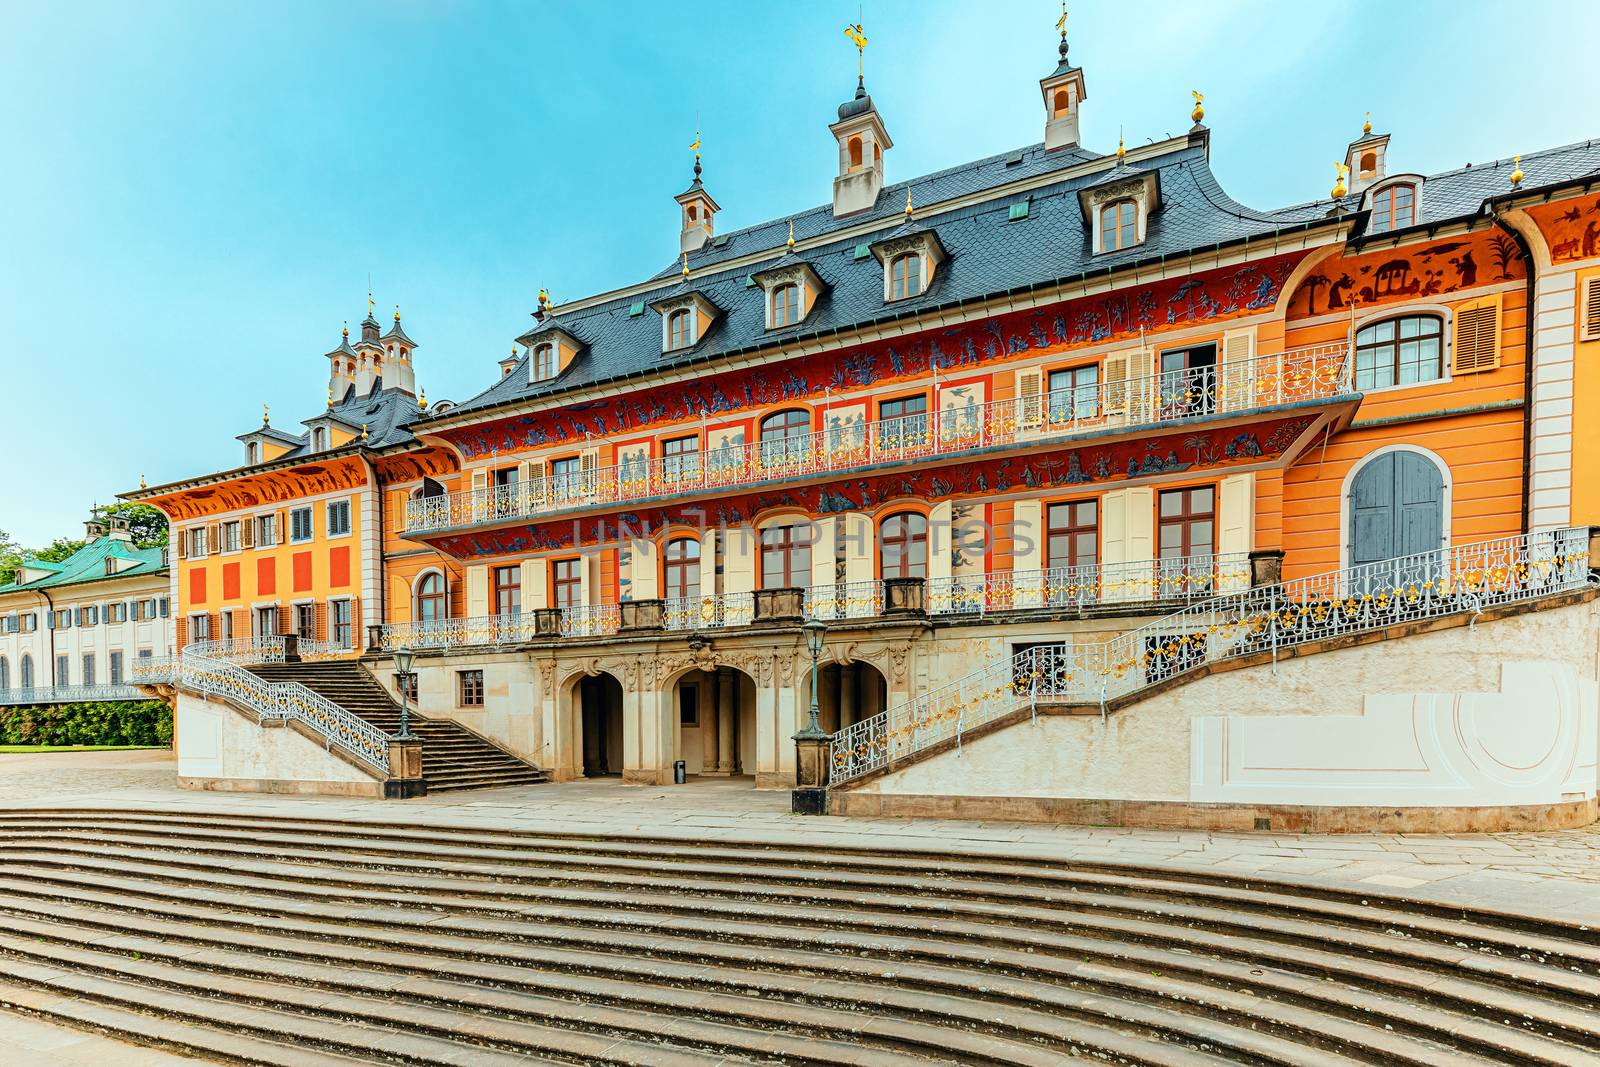 Pillnitz Castle near Dresden, central pavilion of the Wasserpalais with the stairs, on the banks of the Elba, Germany, Europe